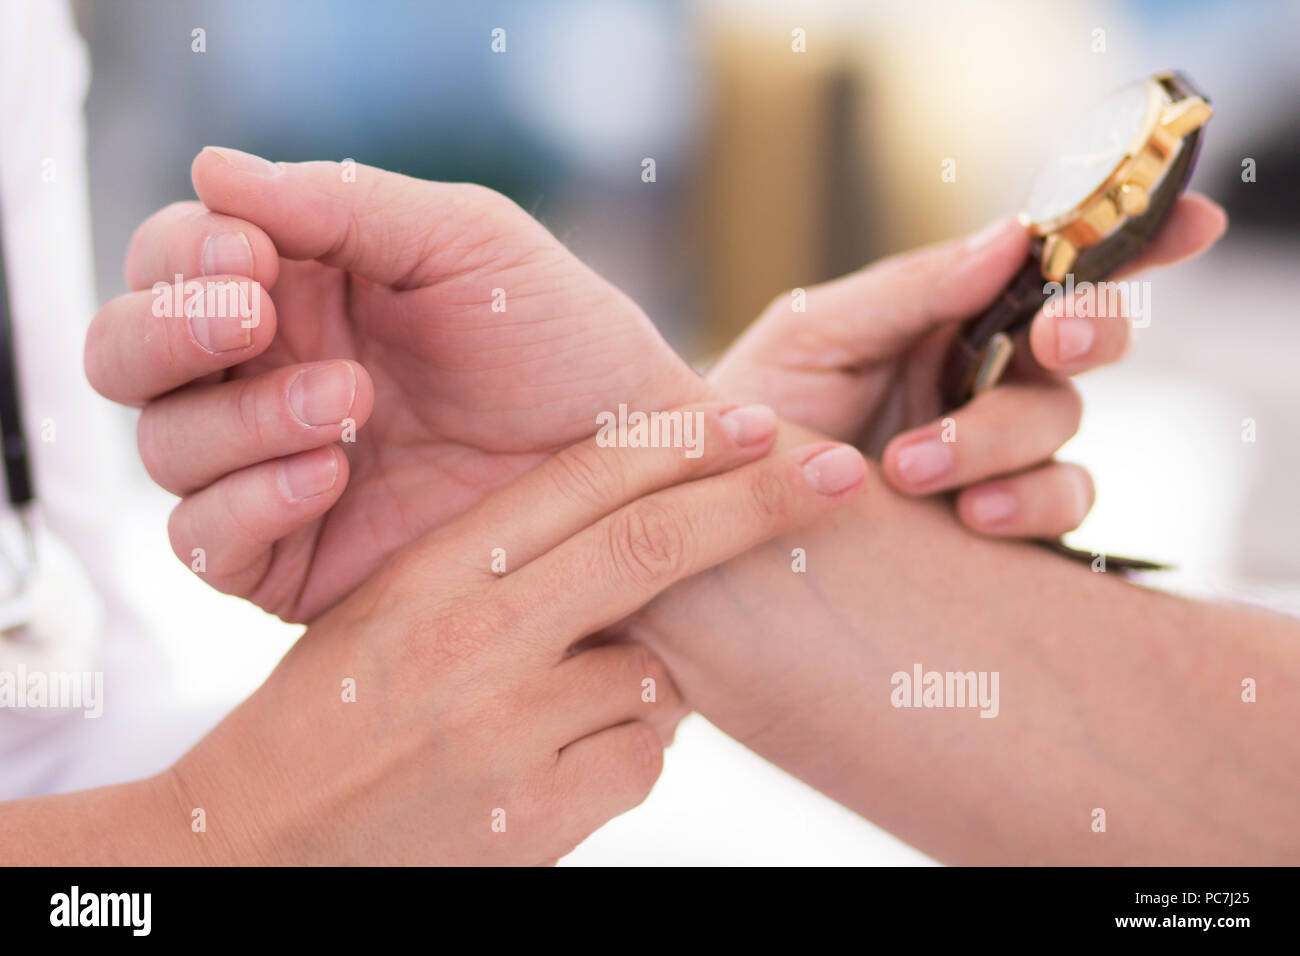 Female doctor checking patients pulse using wrist watch. Close up shot of female hand holding two fingers to another persons wrist for checking pulse. Stock Photo